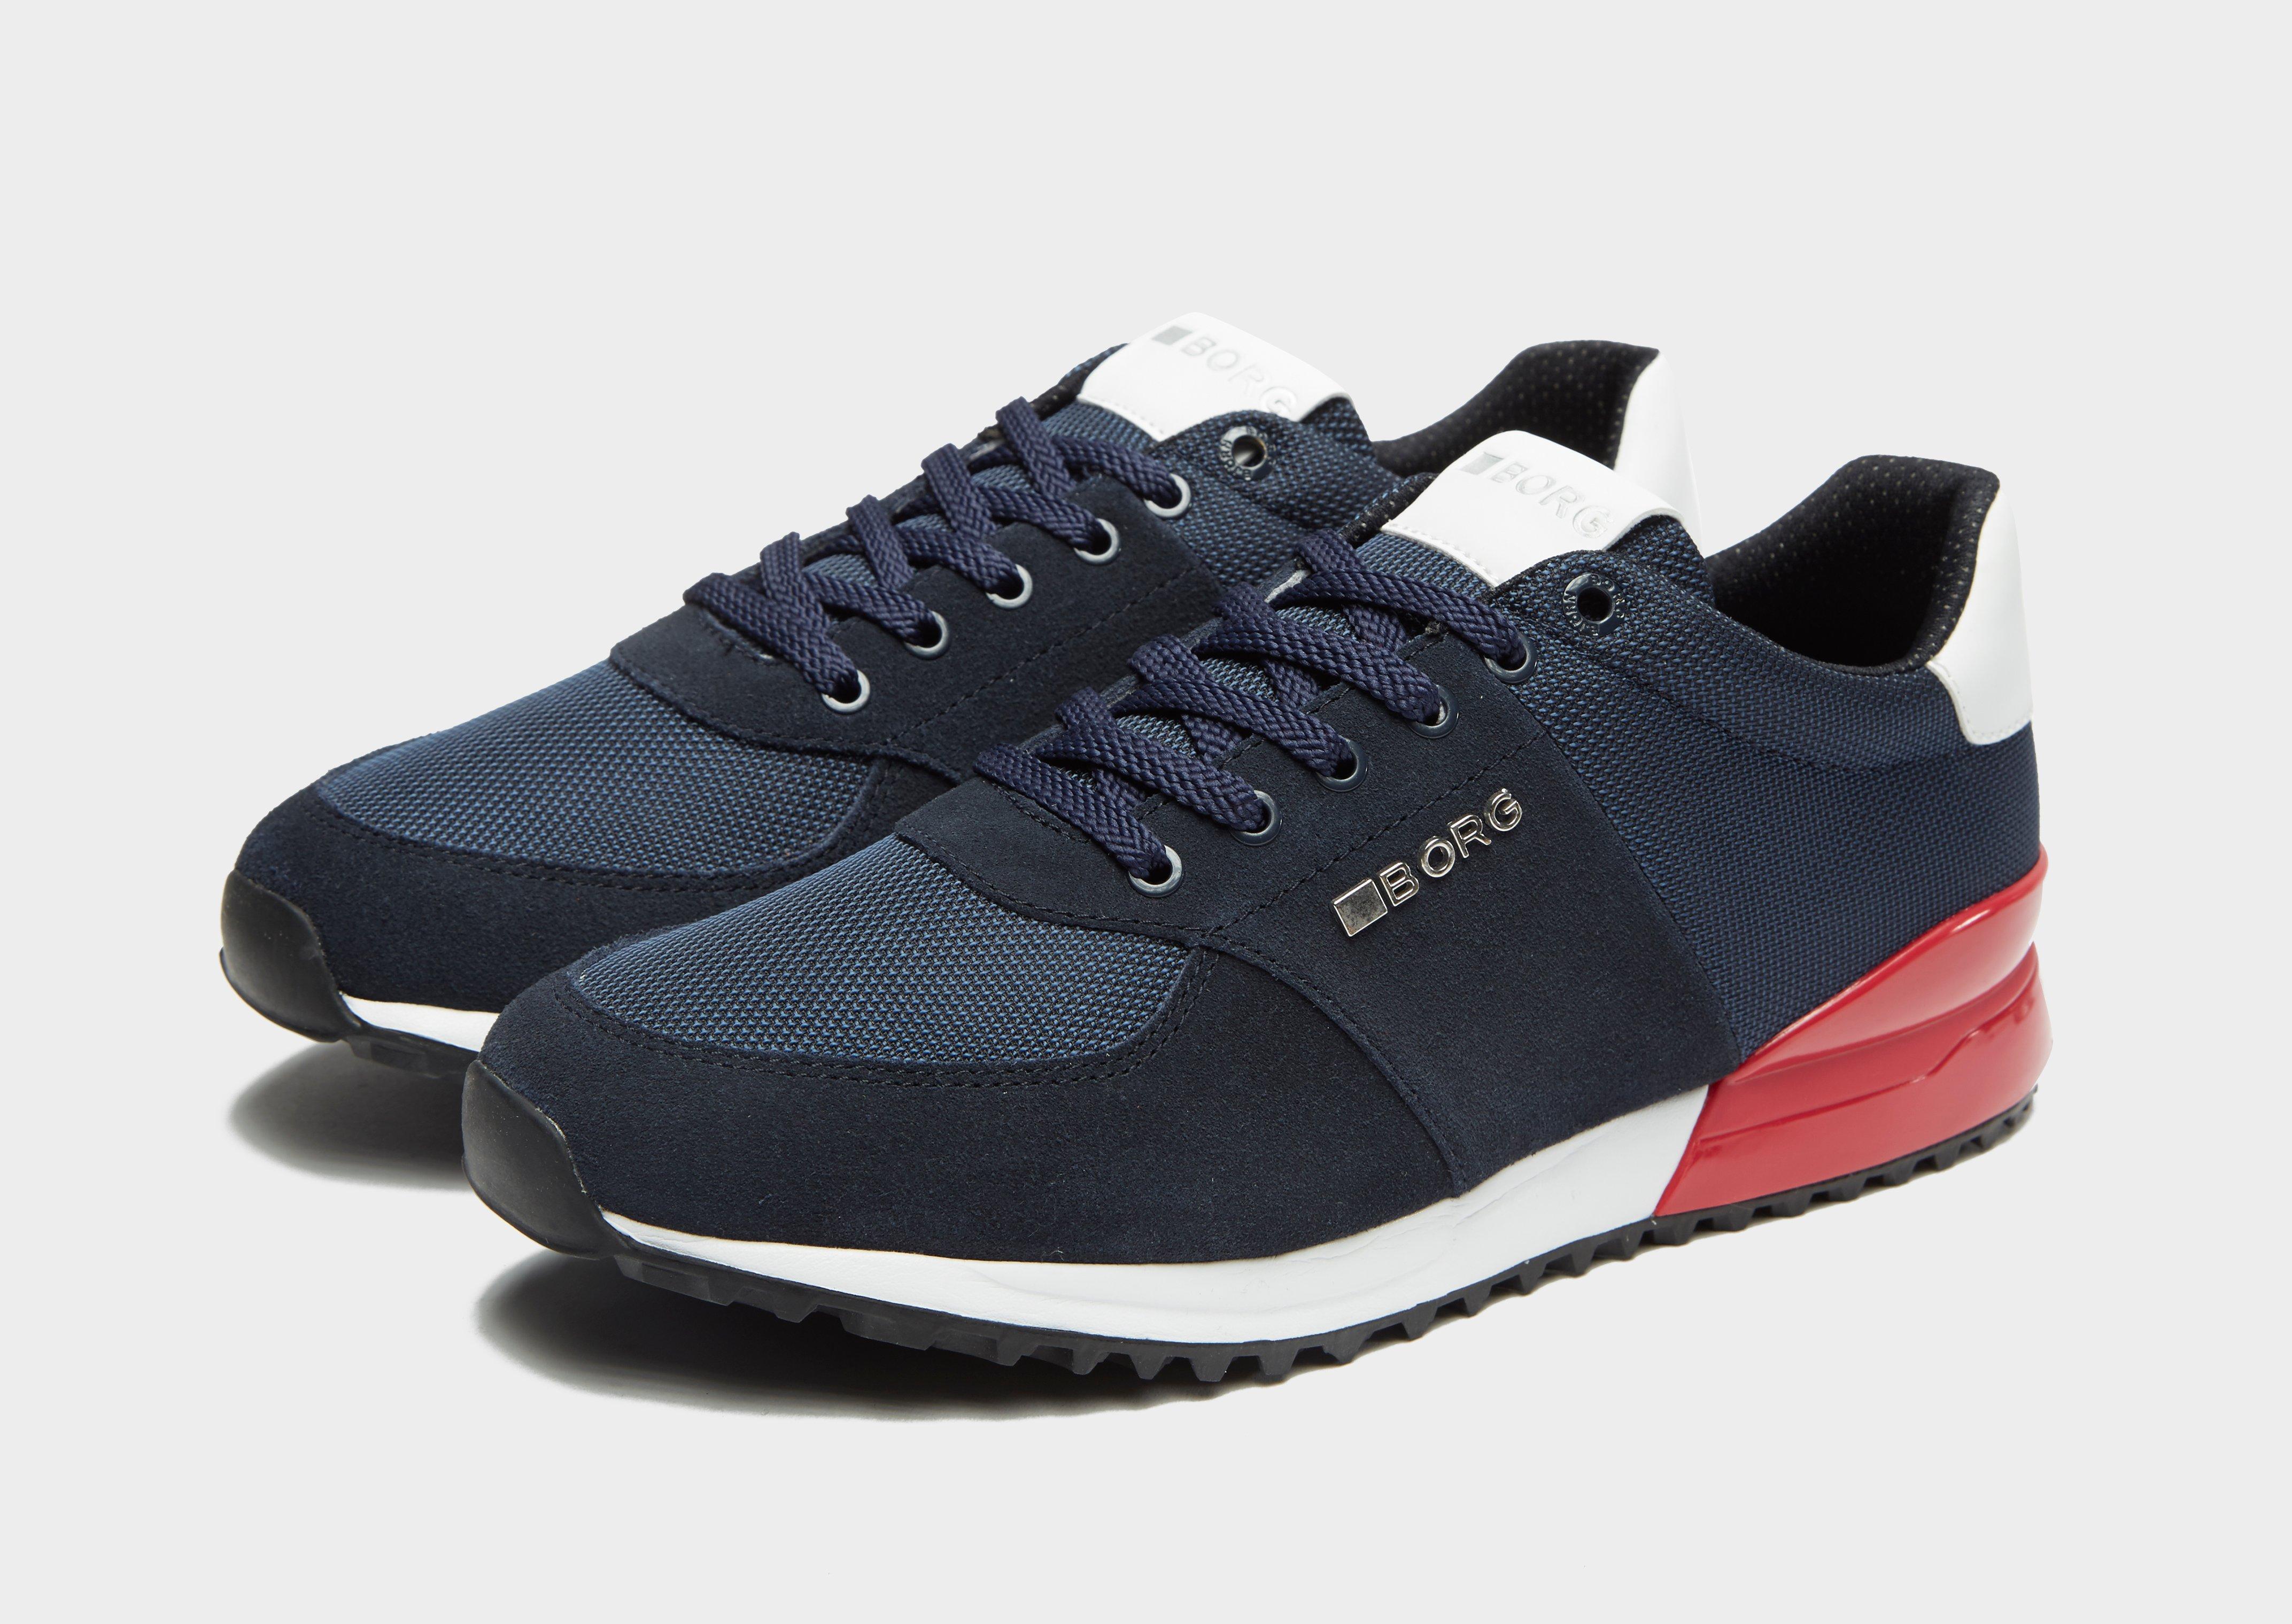 Björn Borg Leather R200 in Navy/Red 